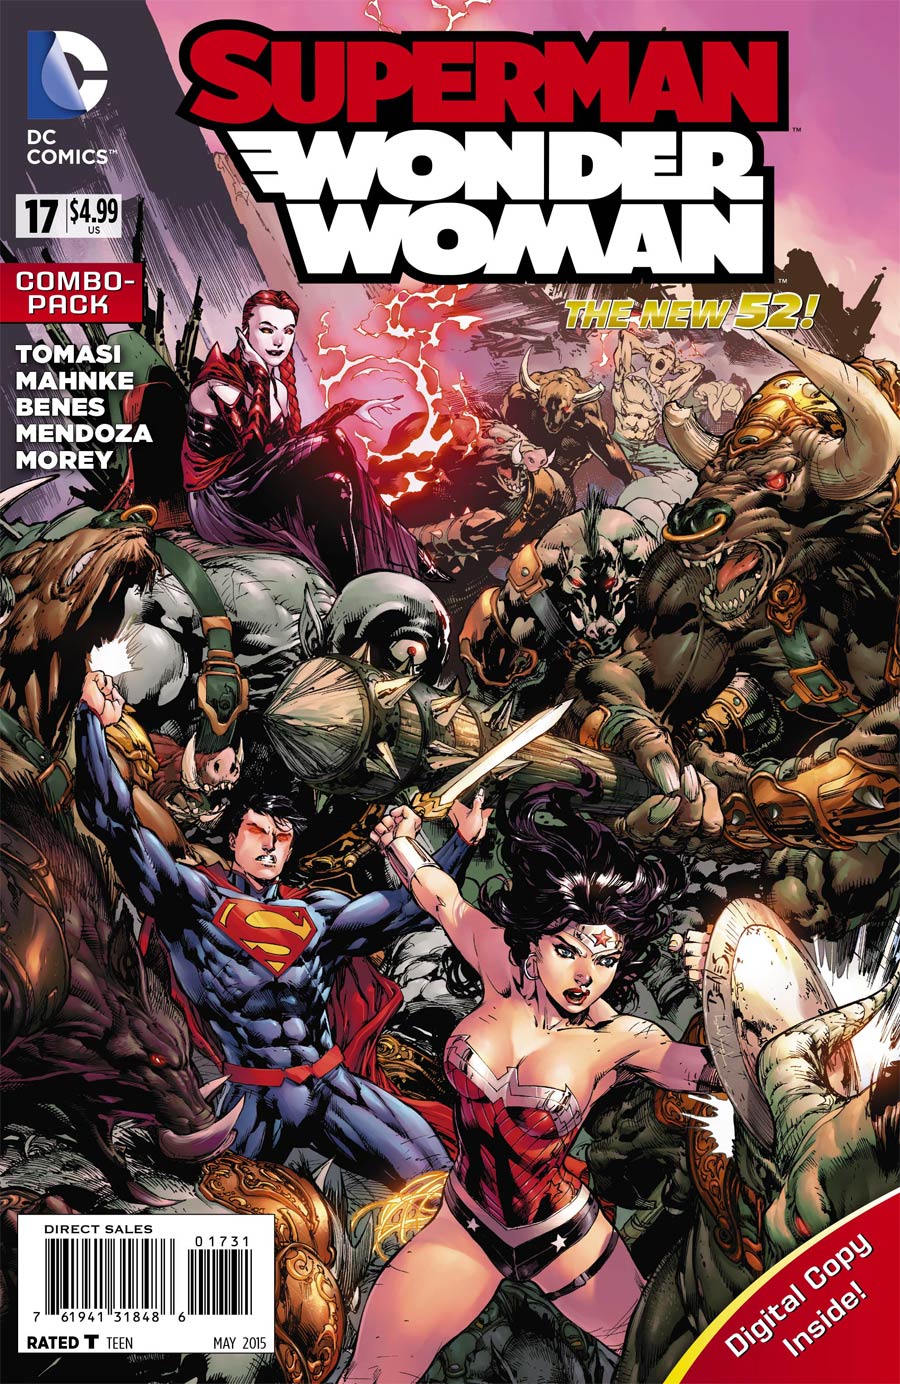 Superman Wonder Woman #17 Cover D Combo Pack Without Polybag